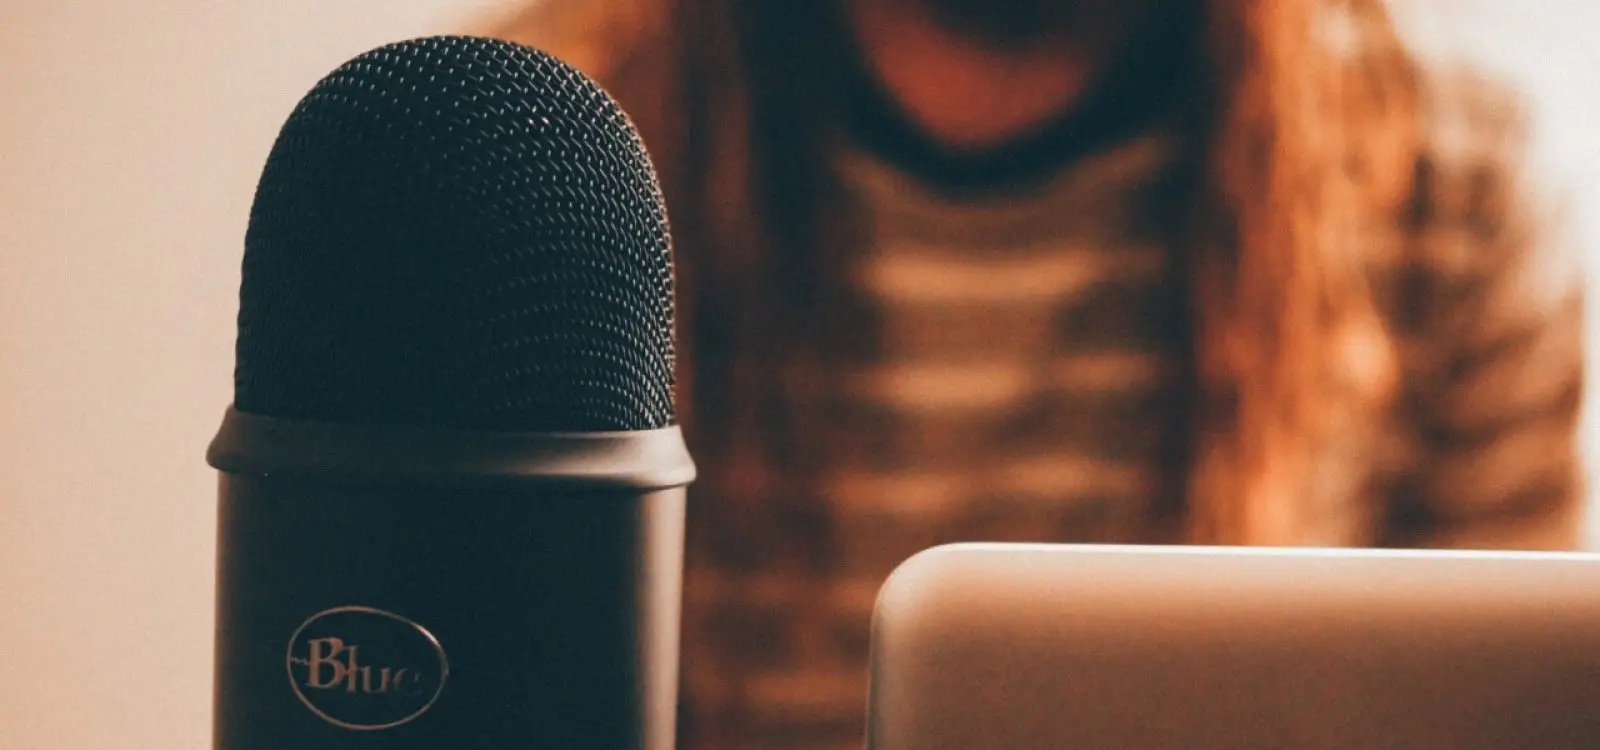 10 great podcasts for software test engineers